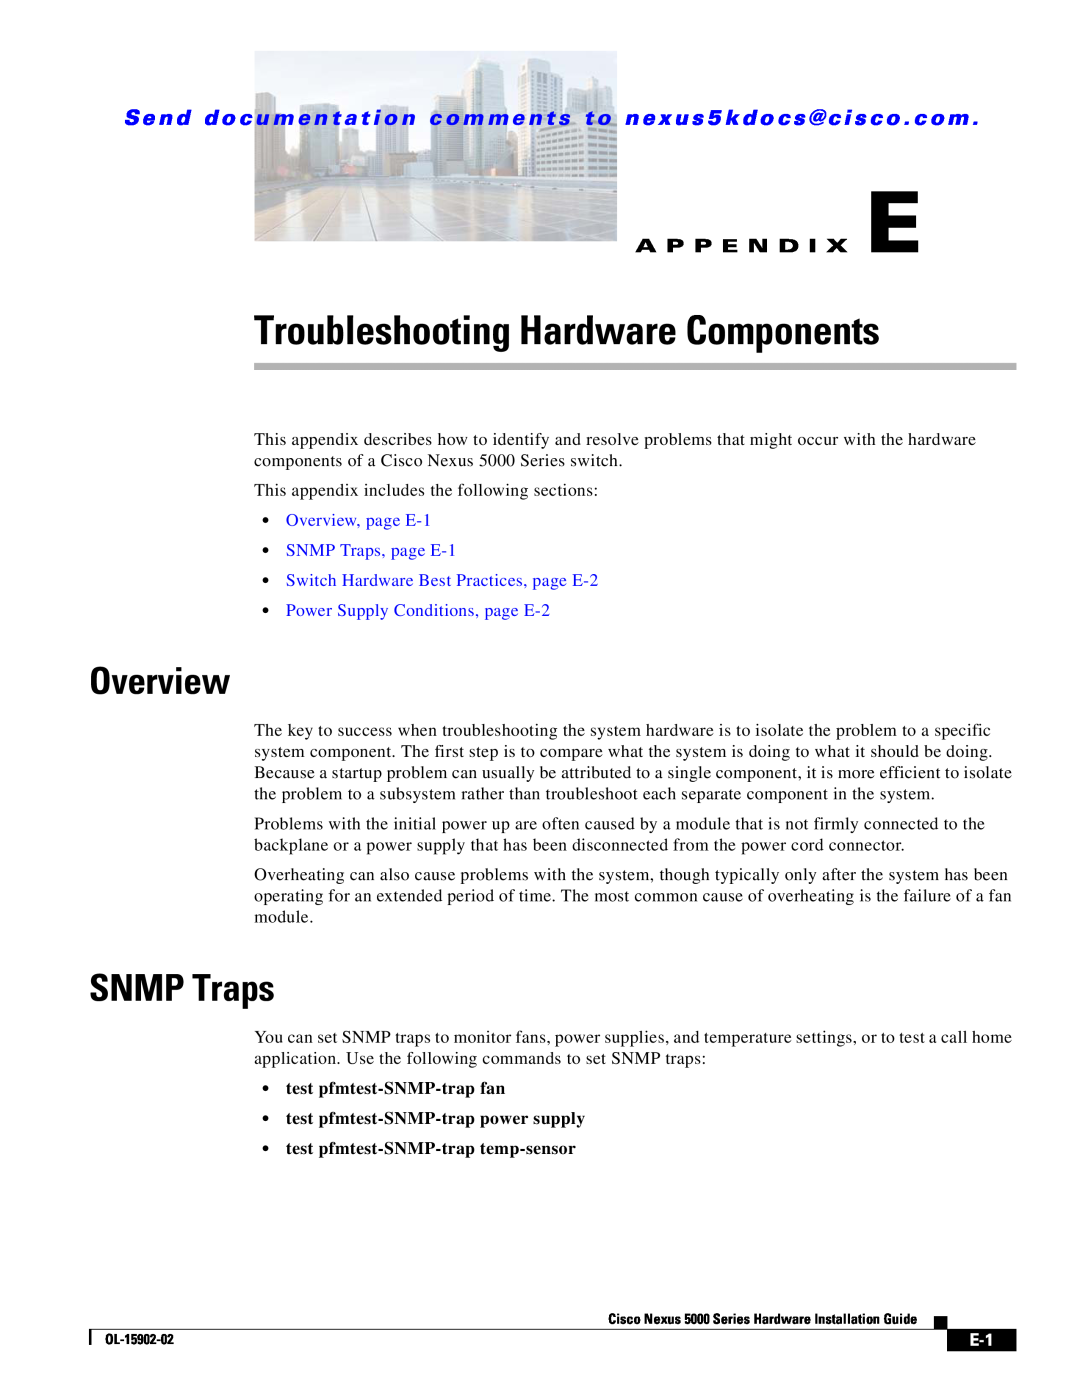 Cisco Systems 5000 manual Troubleshooting Hardware Components, A P P E N D I X E, Overview, page E-1 SNMP Traps, page E-1 